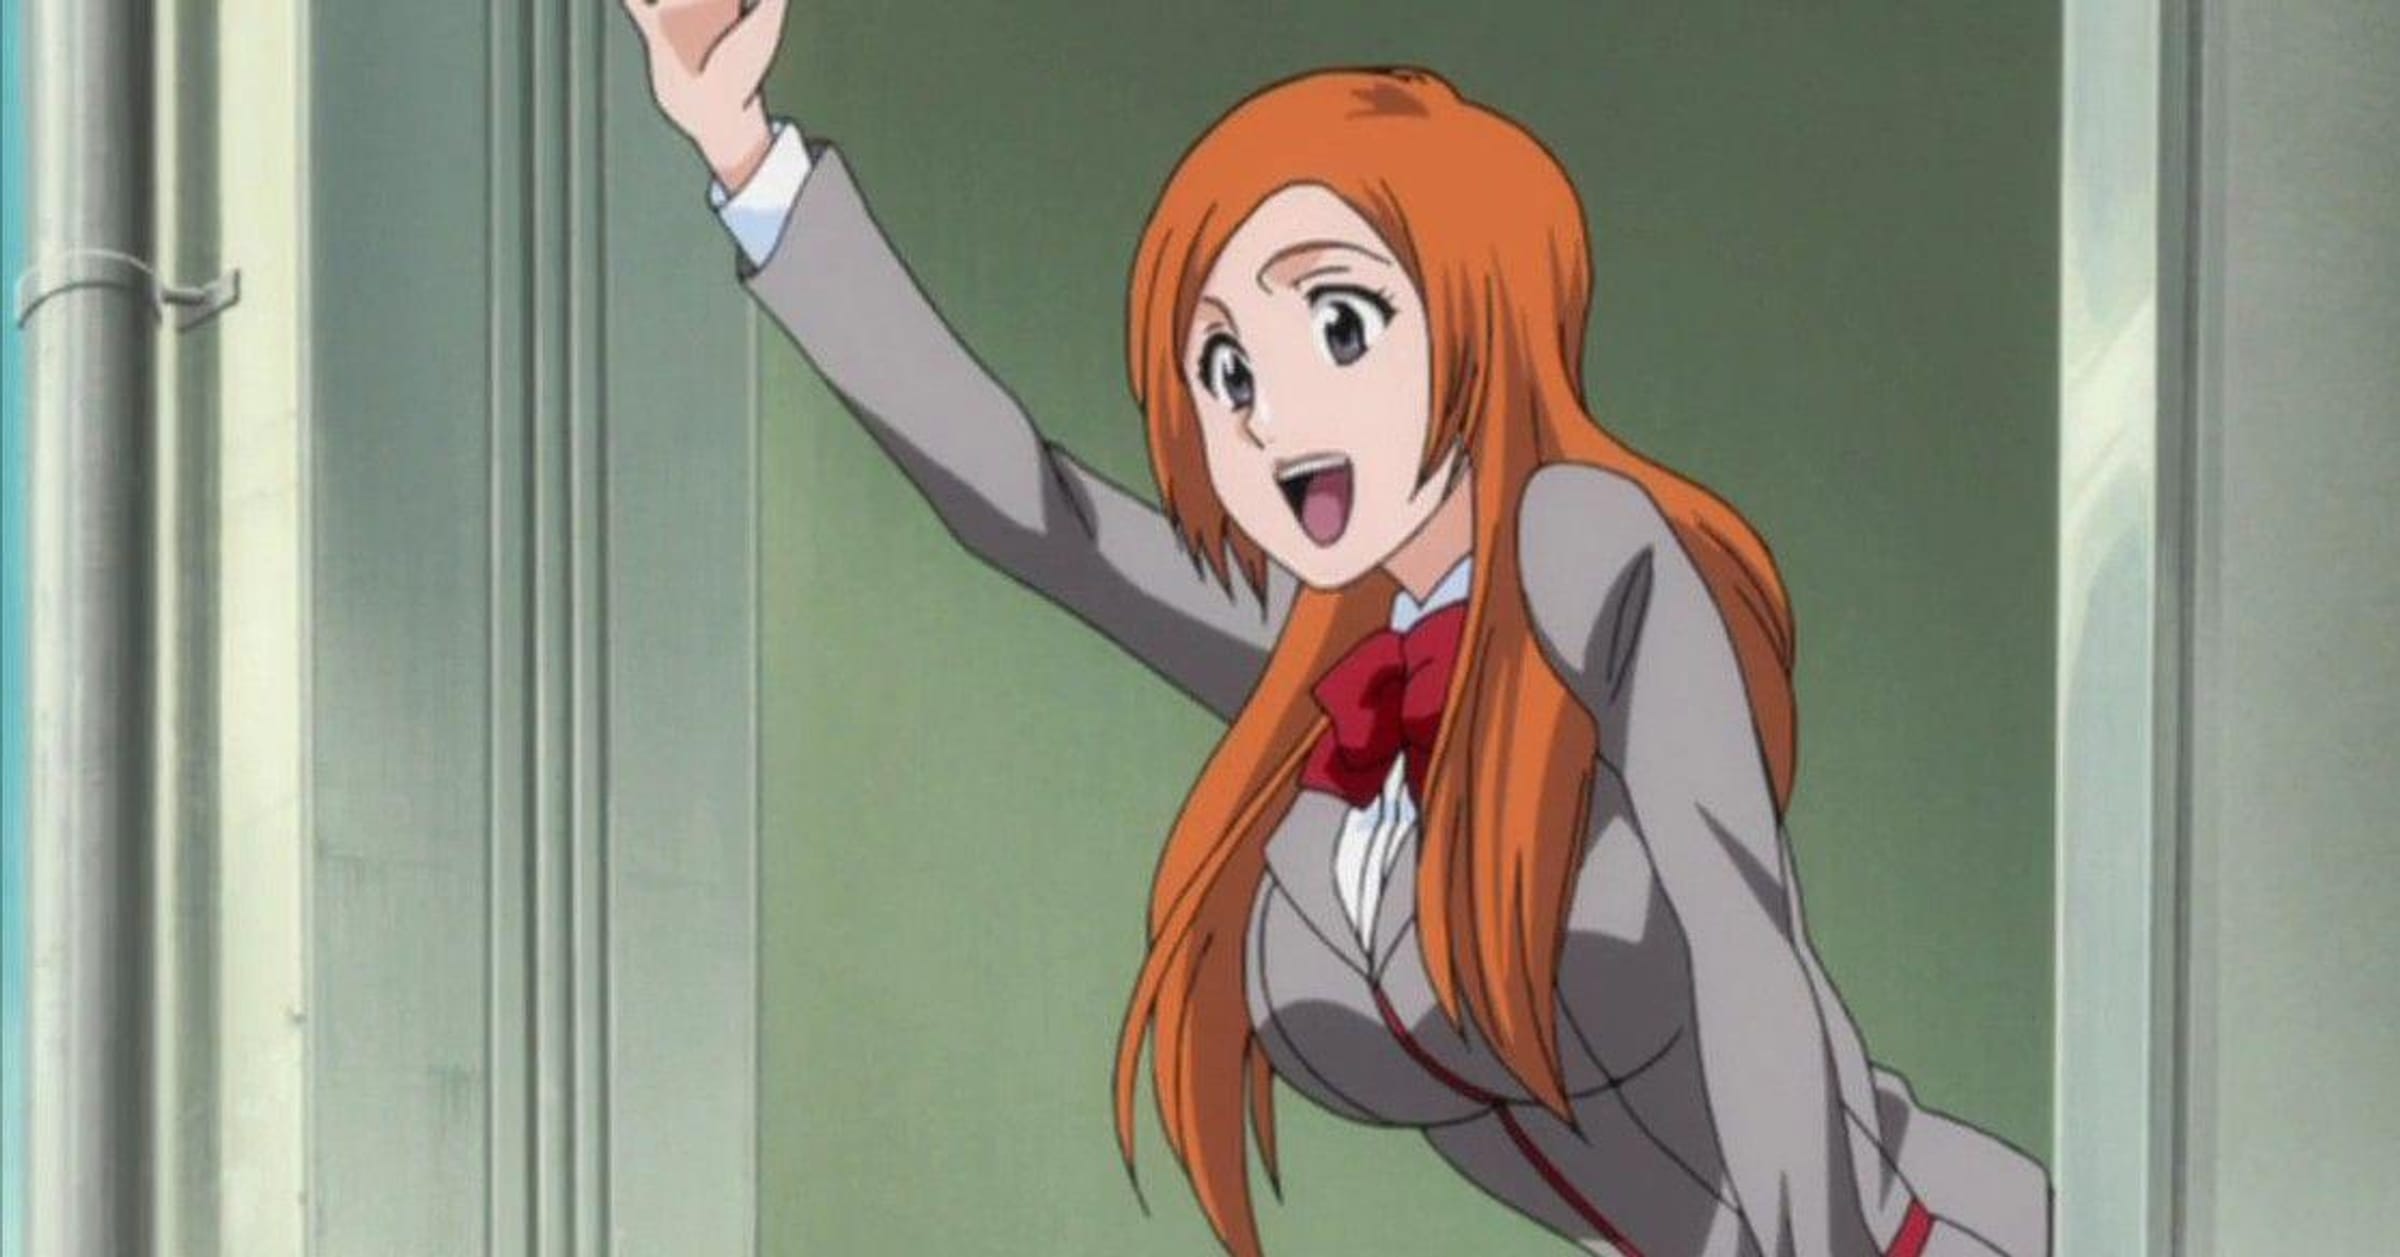 Bleach: 10 Things You Didn't Know About Ichigo & Orihime's